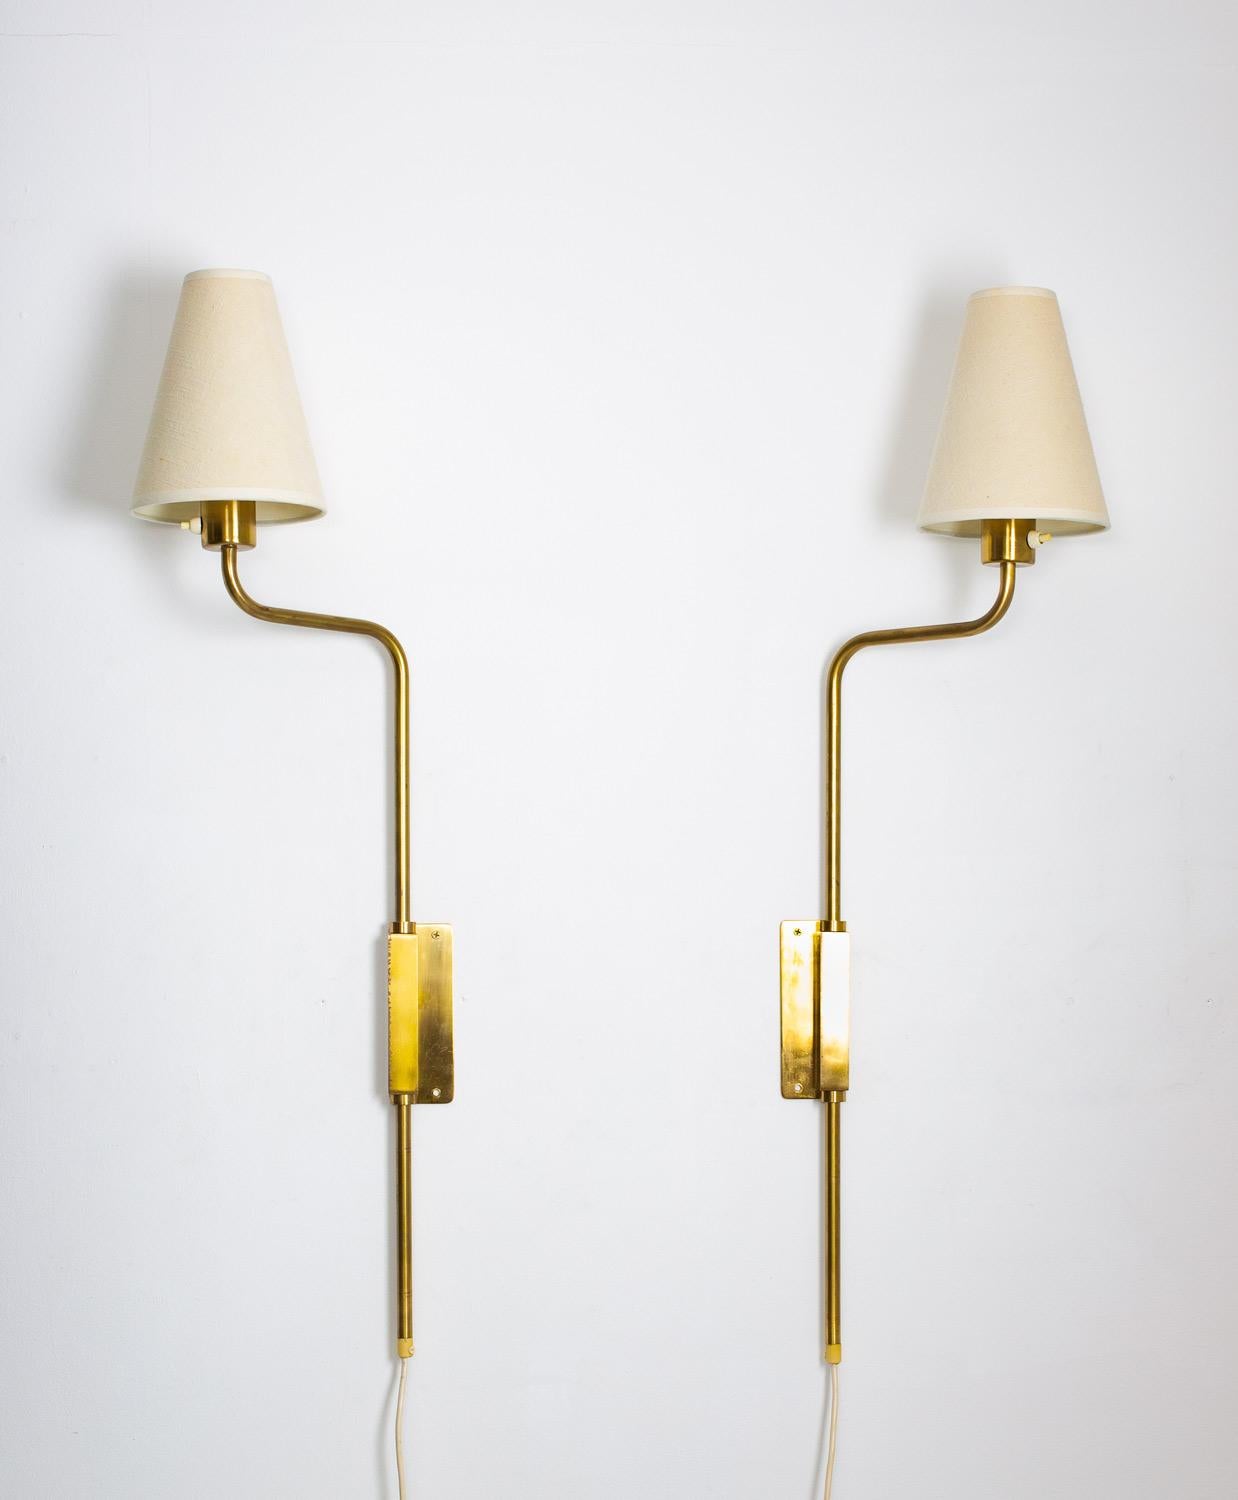 20th Century Pair of Swedish Midcentury Wall Lamps in Brass